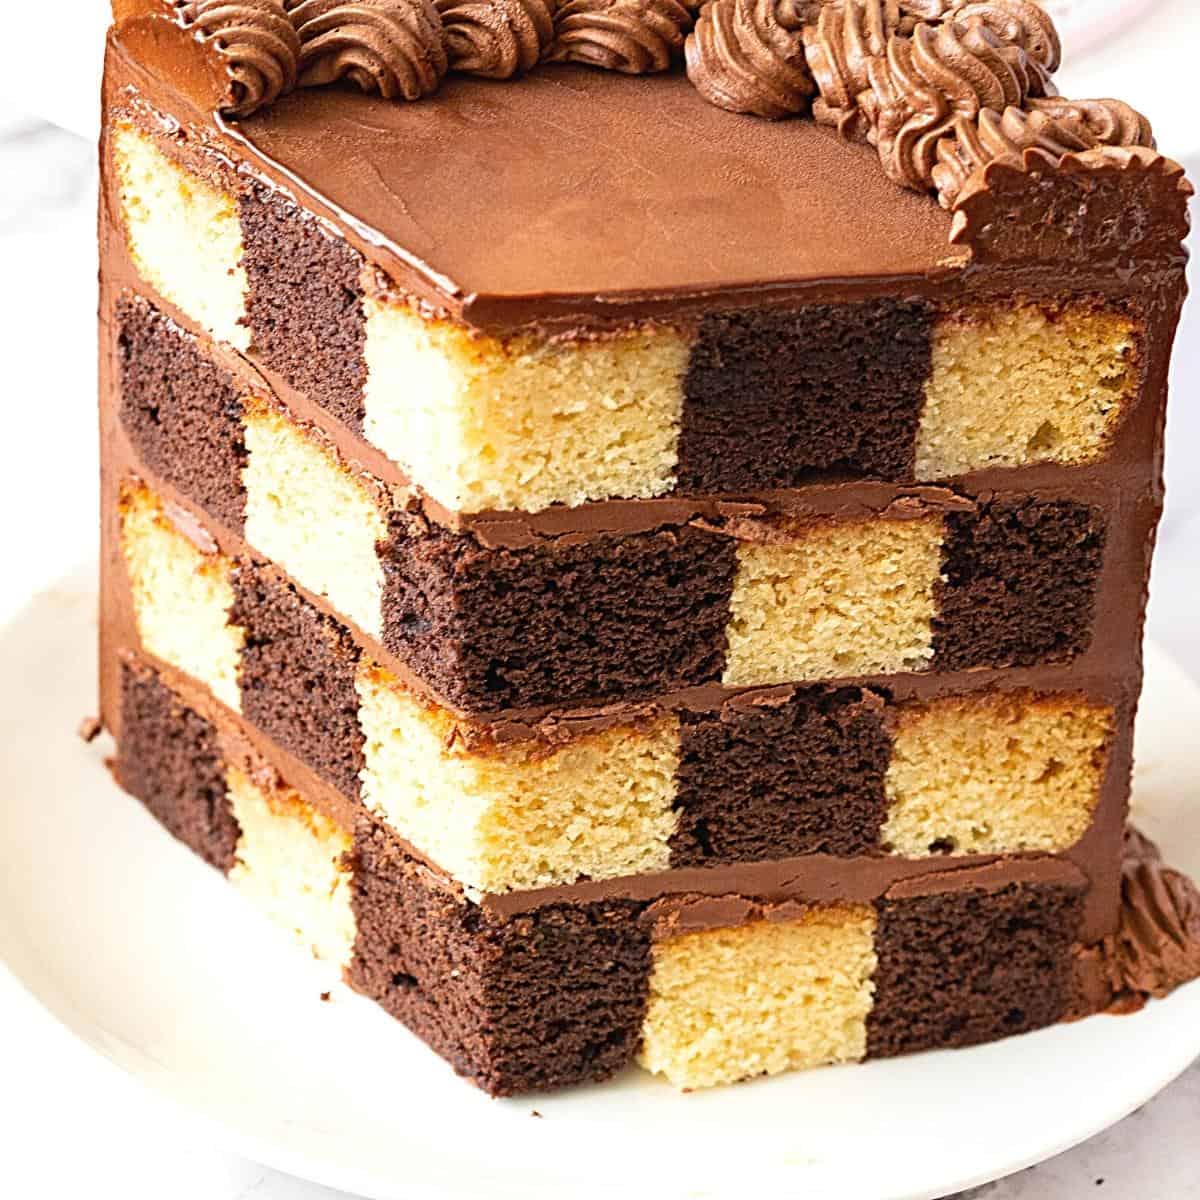 A slice of cake with checkerboard effect.